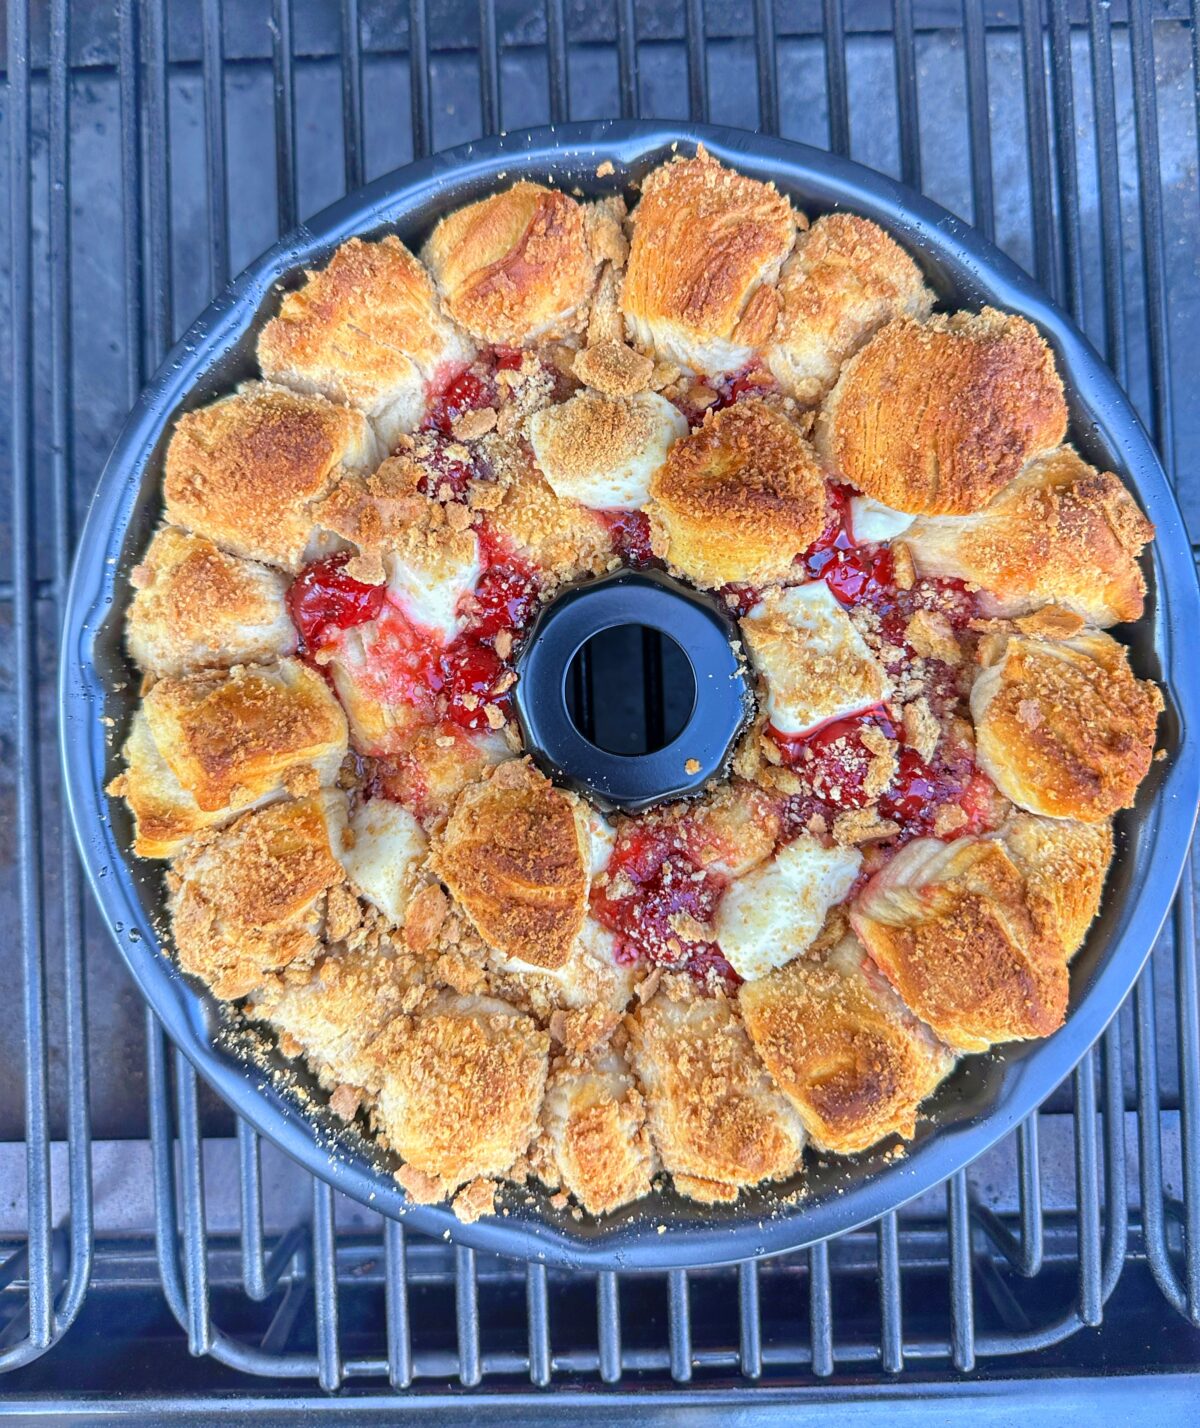 Cherry Cheesecake Monkey Bread baking in the Traeger.